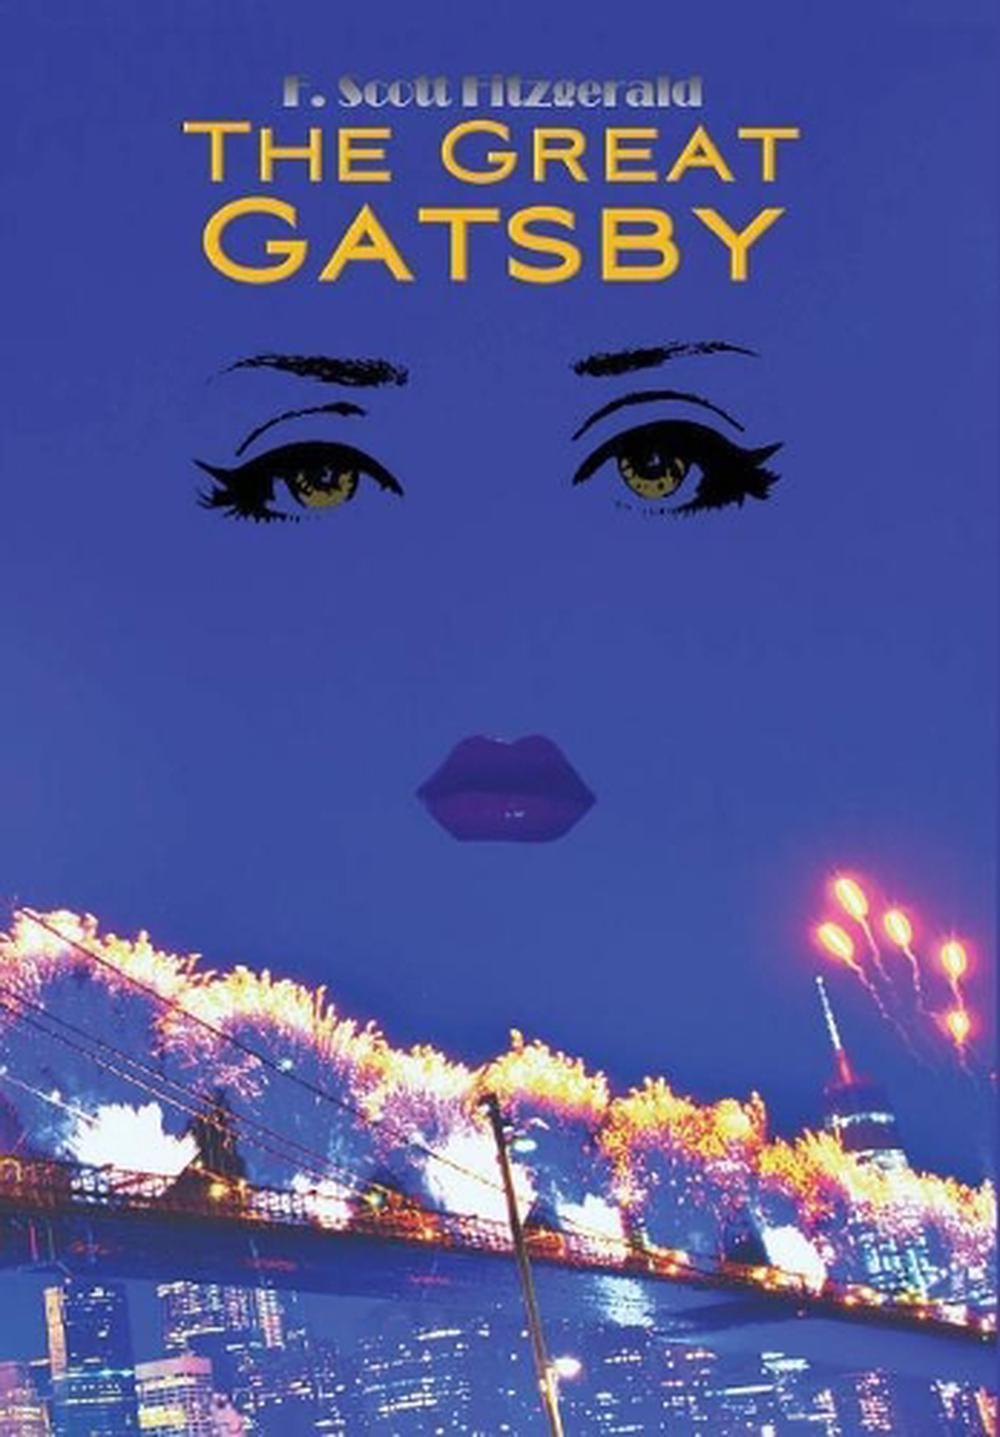 Great Gatsby Wisehouse Classics Edition By F Scott Fitzgerald Hardcover Buy Online At Moby The Great